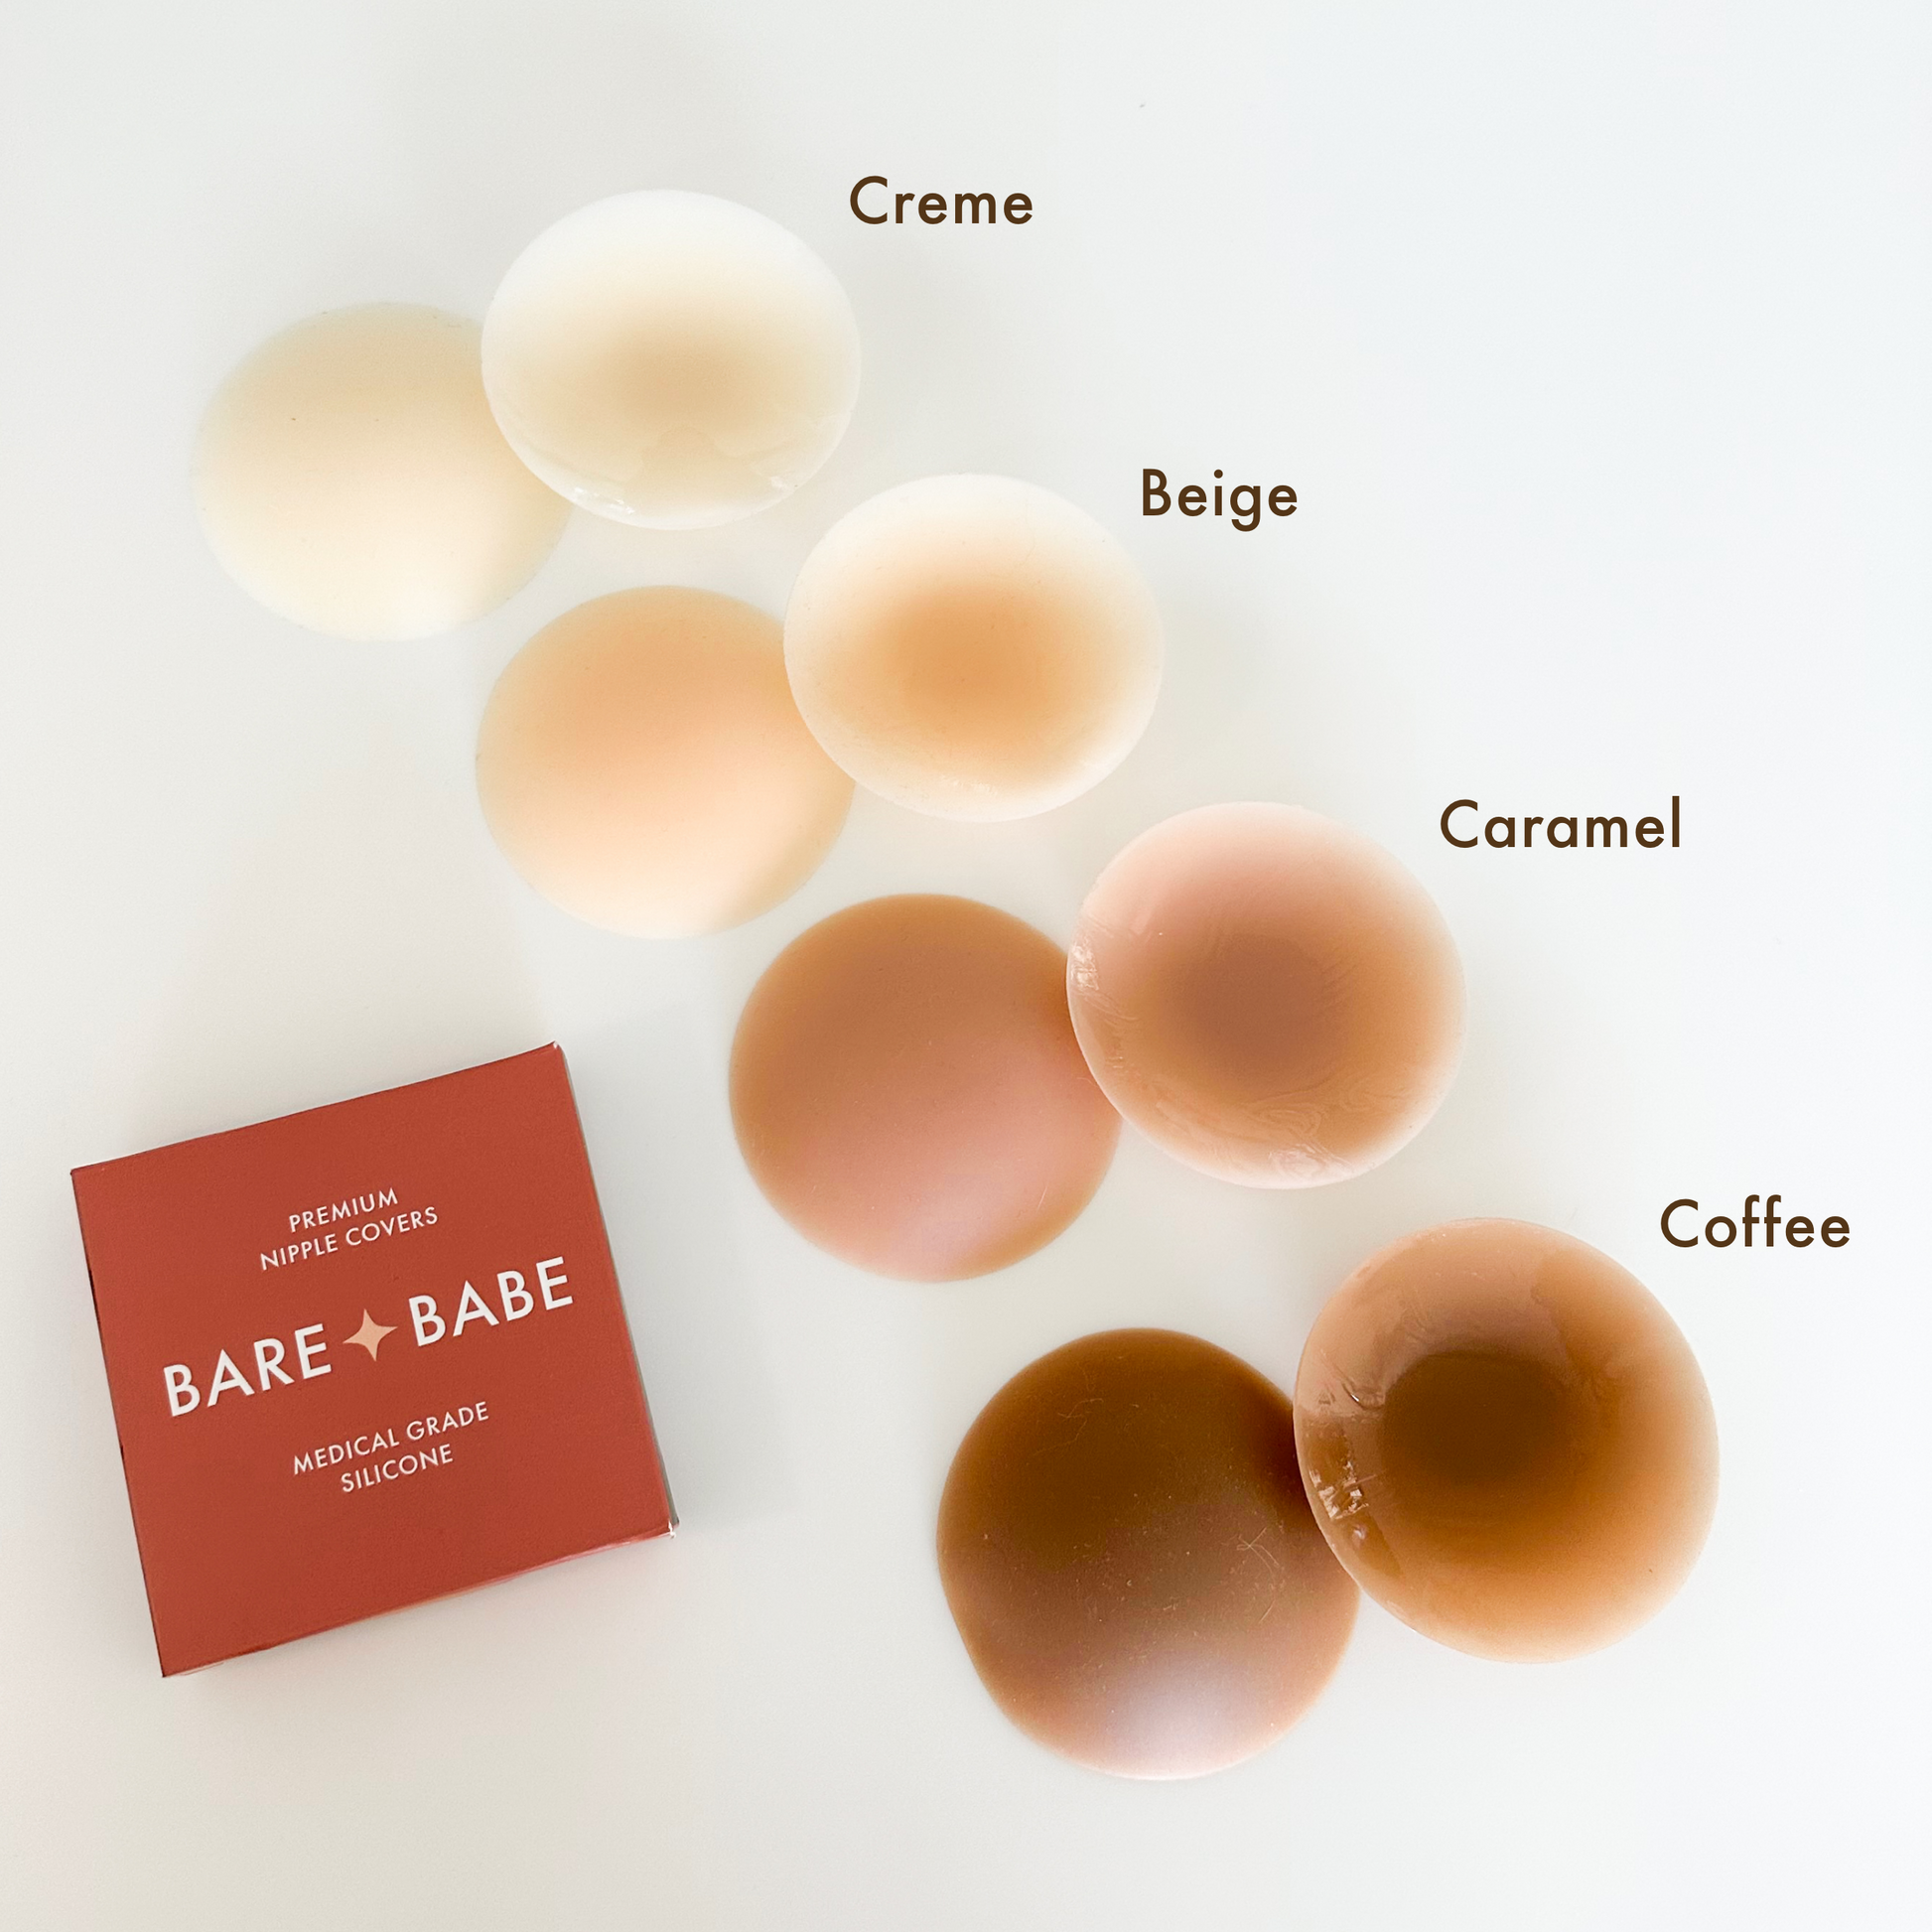 Bare Babe Nipple Covers in 4 Colors: Creme, Beige, Caramel, Coffee